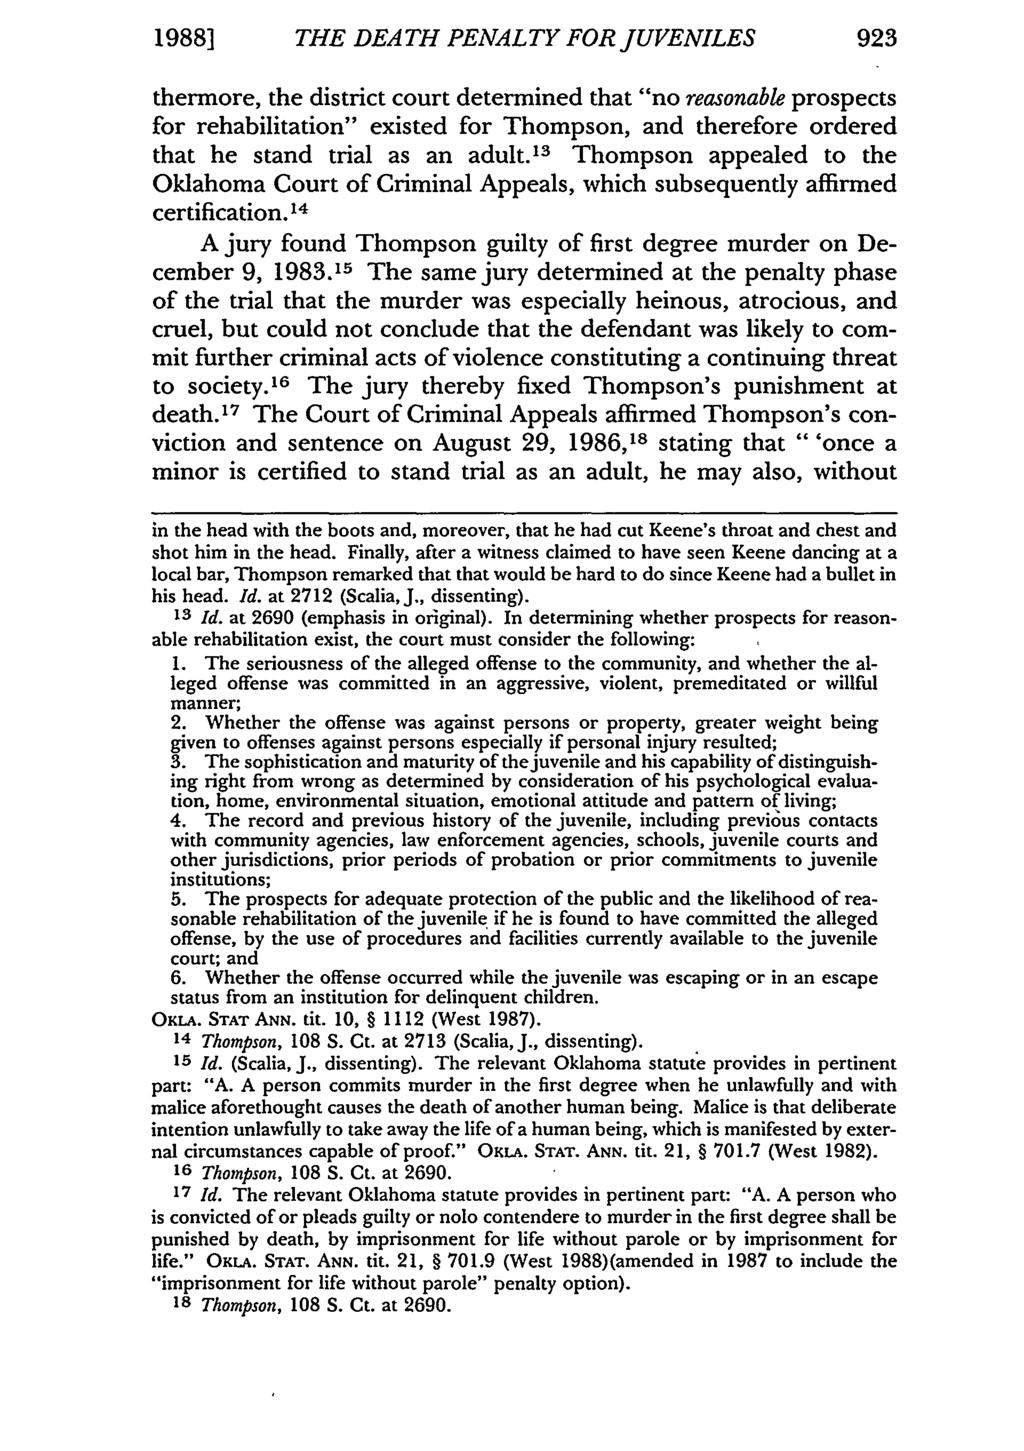 19881 THE DEATH PENALTY FOR JUVENILES 923 thermore, the district court determined that "no reasonable prospects for rehabilitation" existed for Thompson, and therefore ordered that he stand trial as